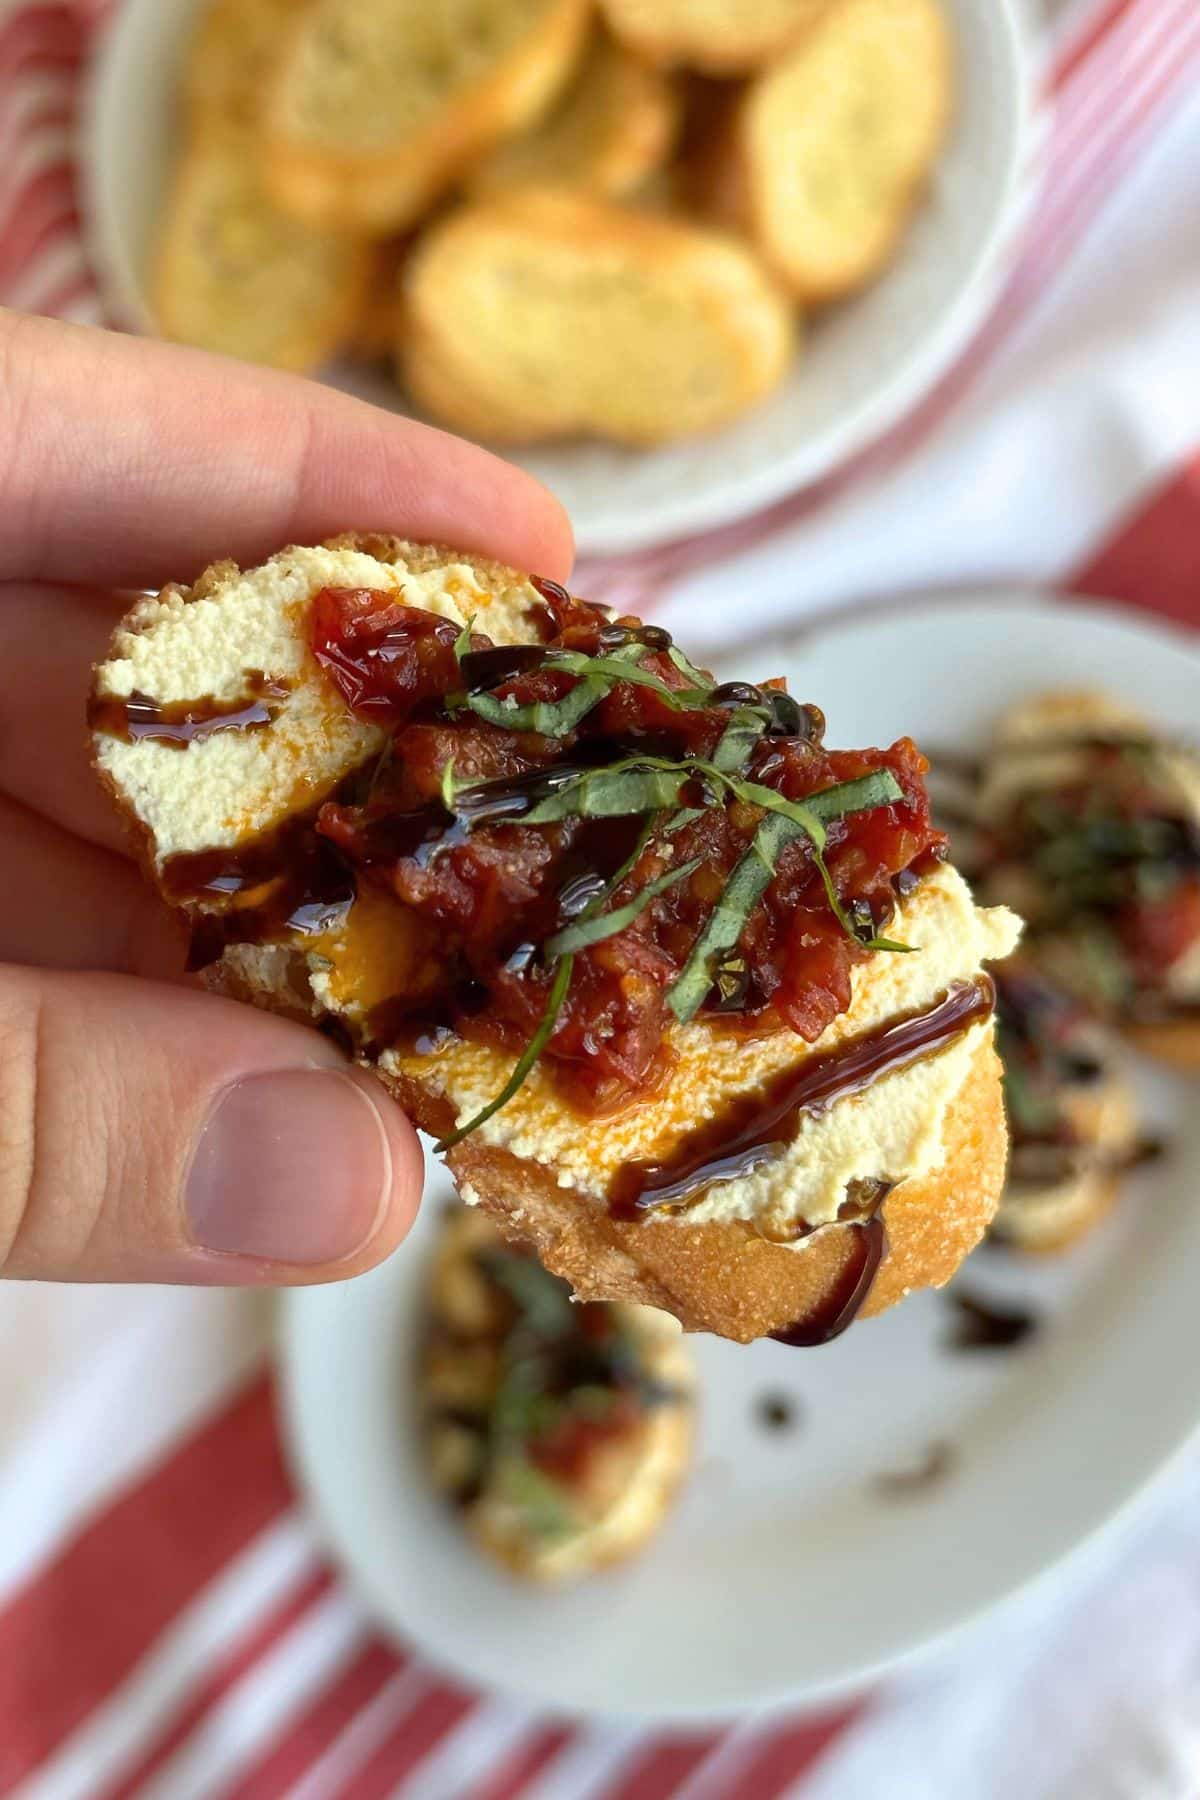 Crostino with tofu ricotta, jammy tomato confit, basil chiffonade, and balsamic glaze. More vegan crostini appetizers are in the background.